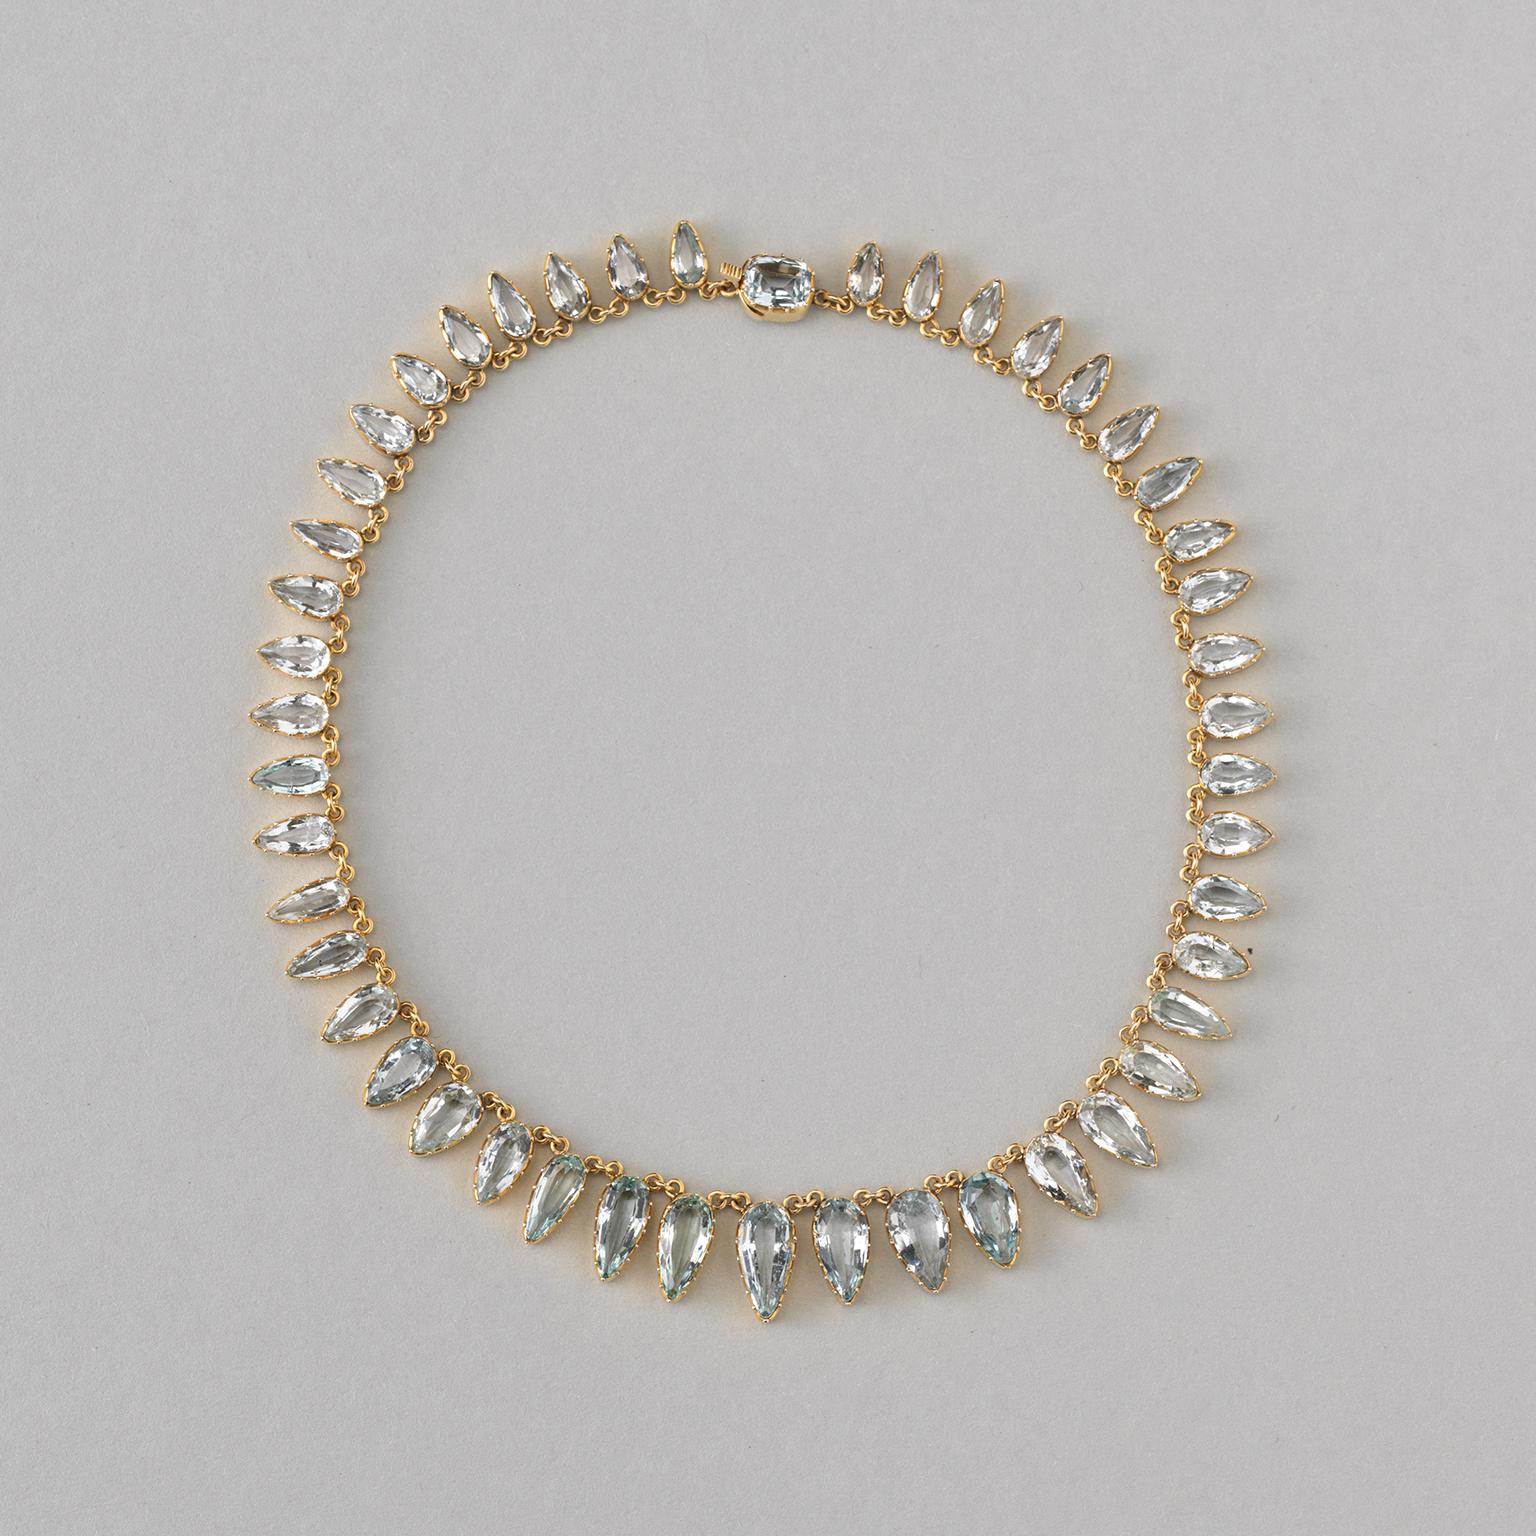 A stunning 15-carat yellow gold necklace with 46 drop-shaped aquamarines diminishing in size, with the largest stone in the middle. Beautiful open setting, in the clasp a cushion cut aquamarine. England, circa 1890-1900.

Weight: 30.26 grams
Length: